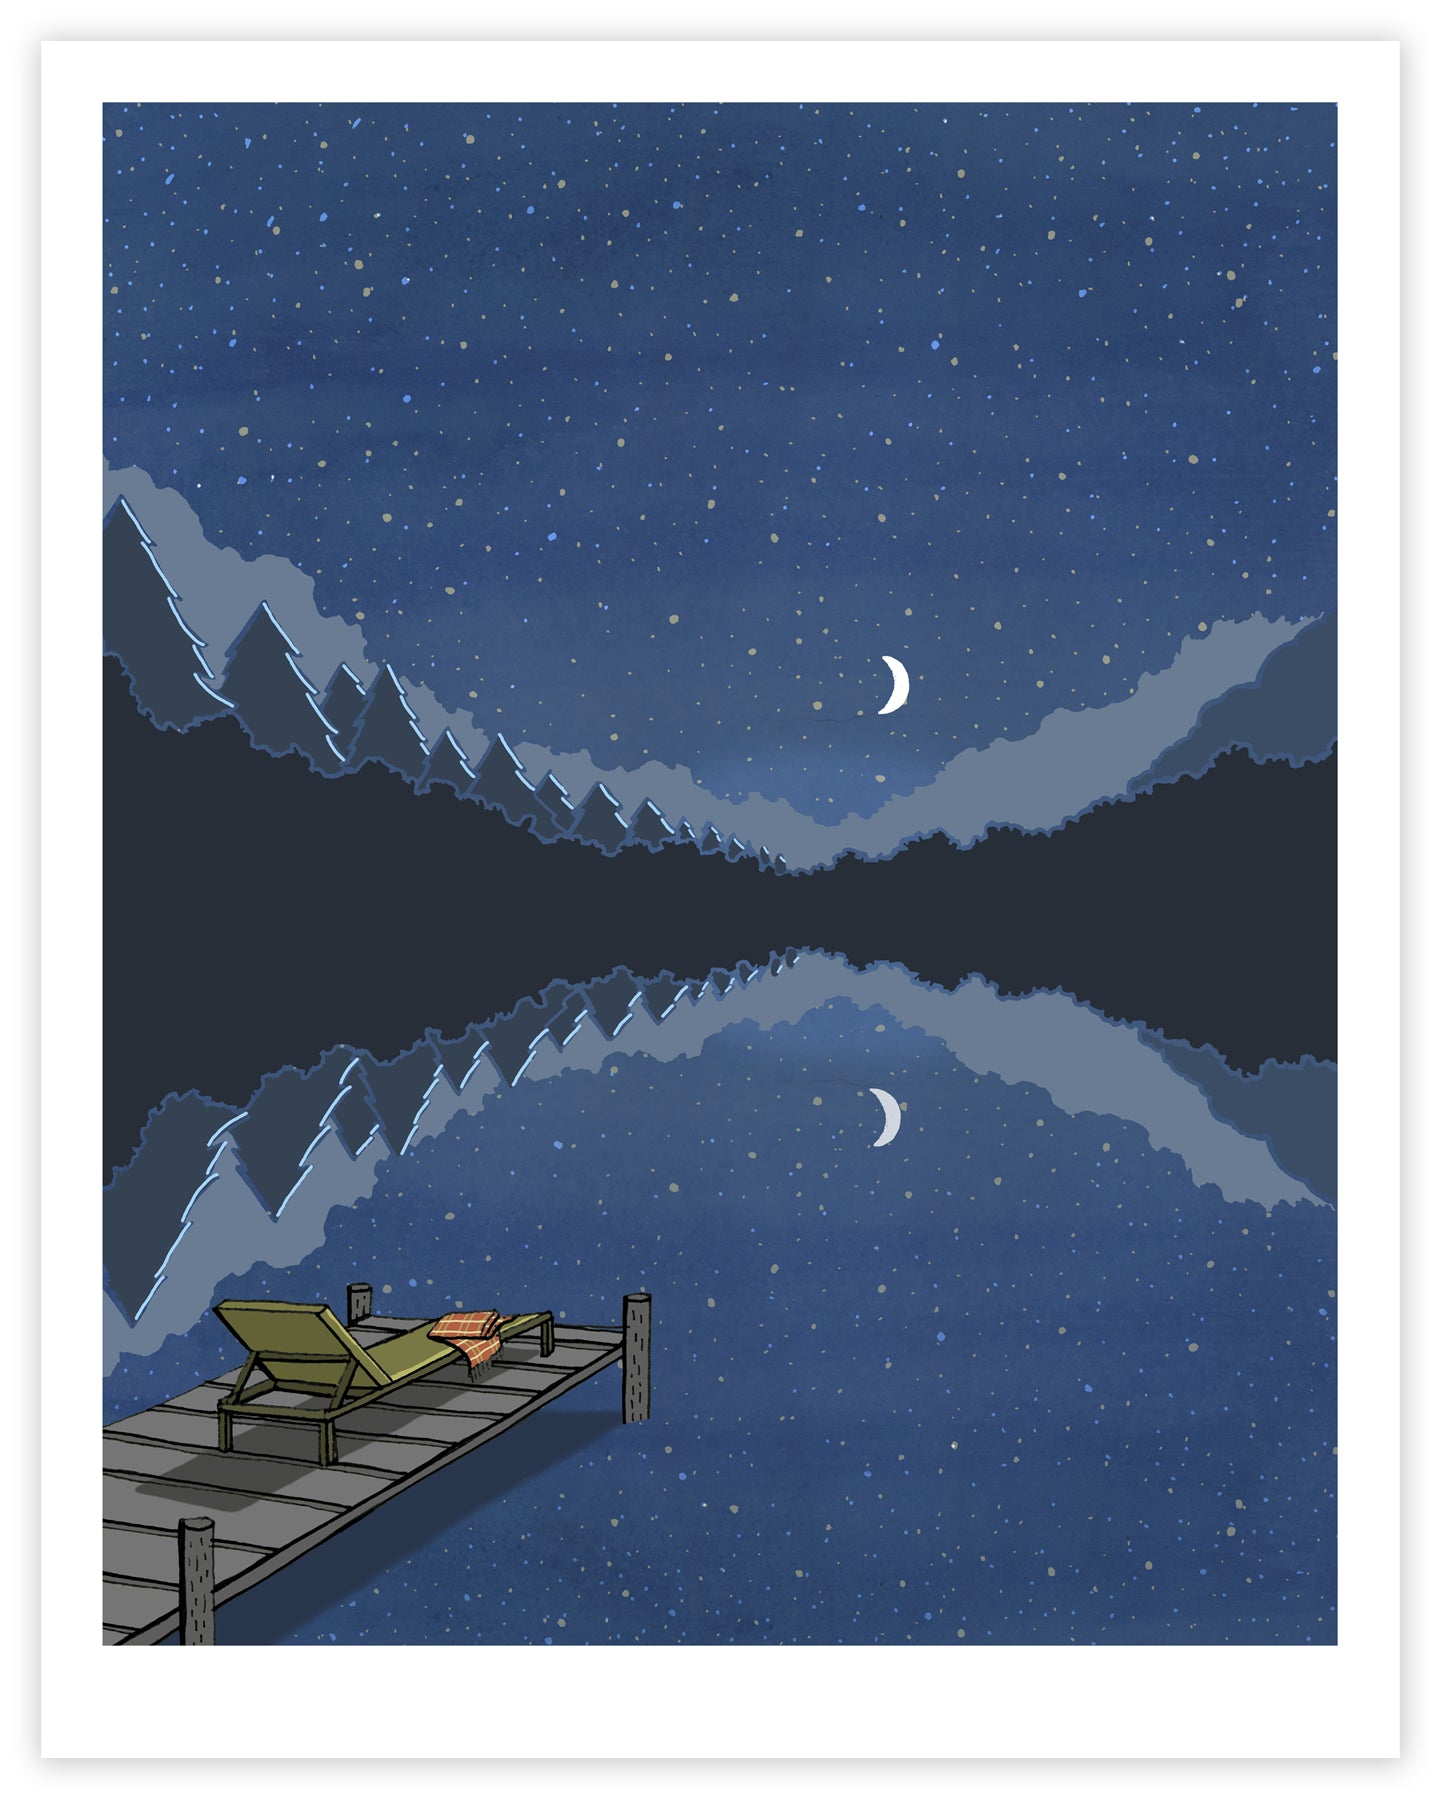 On the Dock under the Star-filled Sky Print